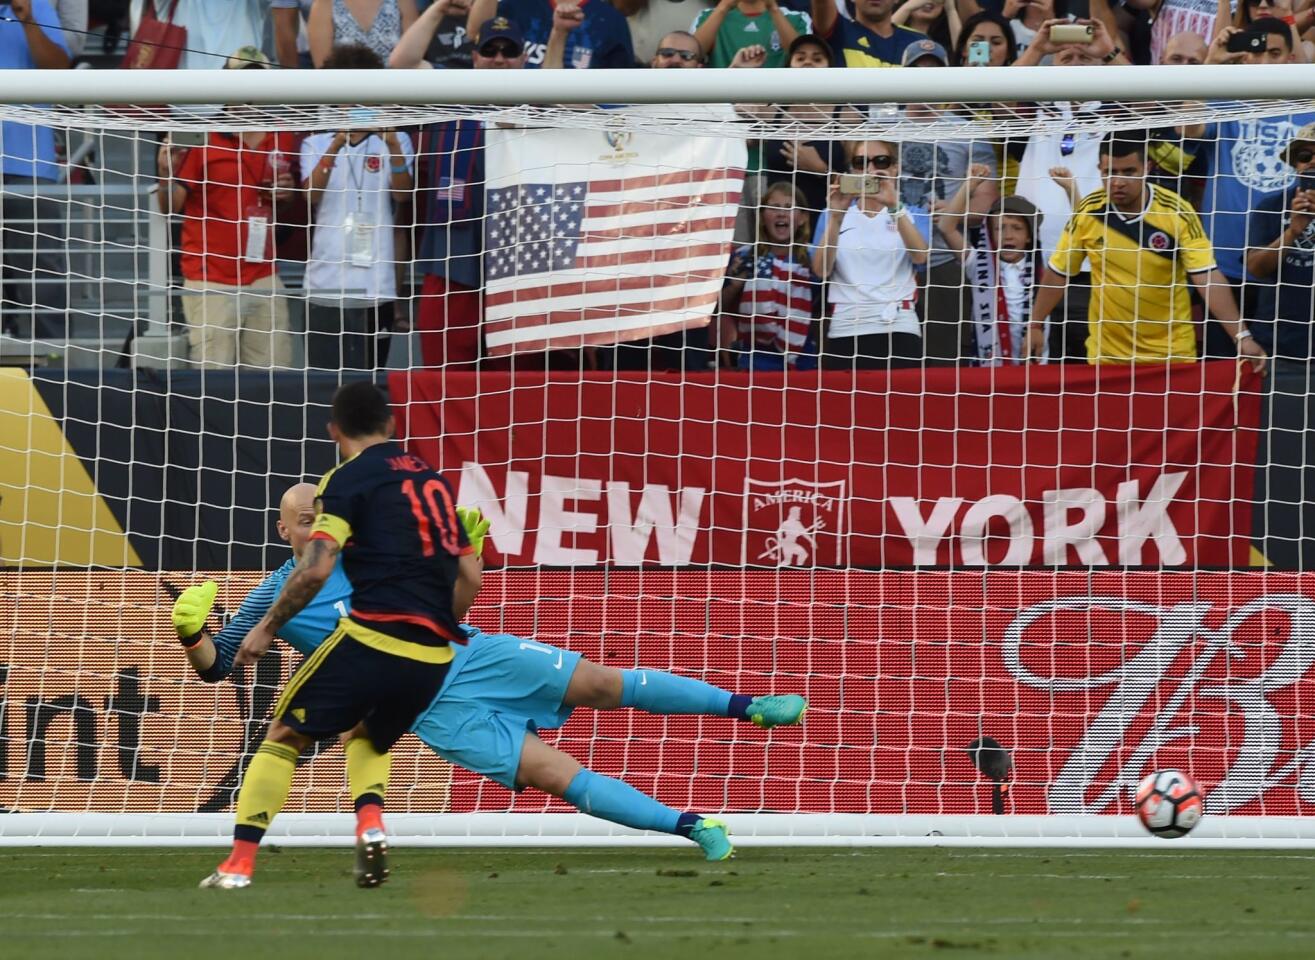 Colombia's James Rodriguez scores a penalty past USA's goalkeeper Brad Guzan during the Copa America Centenario football tournament match in Santa Clara, California, United States, on June 3, 2016. / AFP PHOTO / MARK RALSTONMARK RALSTON/AFP/Getty Images ** OUTS - ELSENT, FPG, CM - OUTS * NM, PH, VA if sourced by CT, LA or MoD **